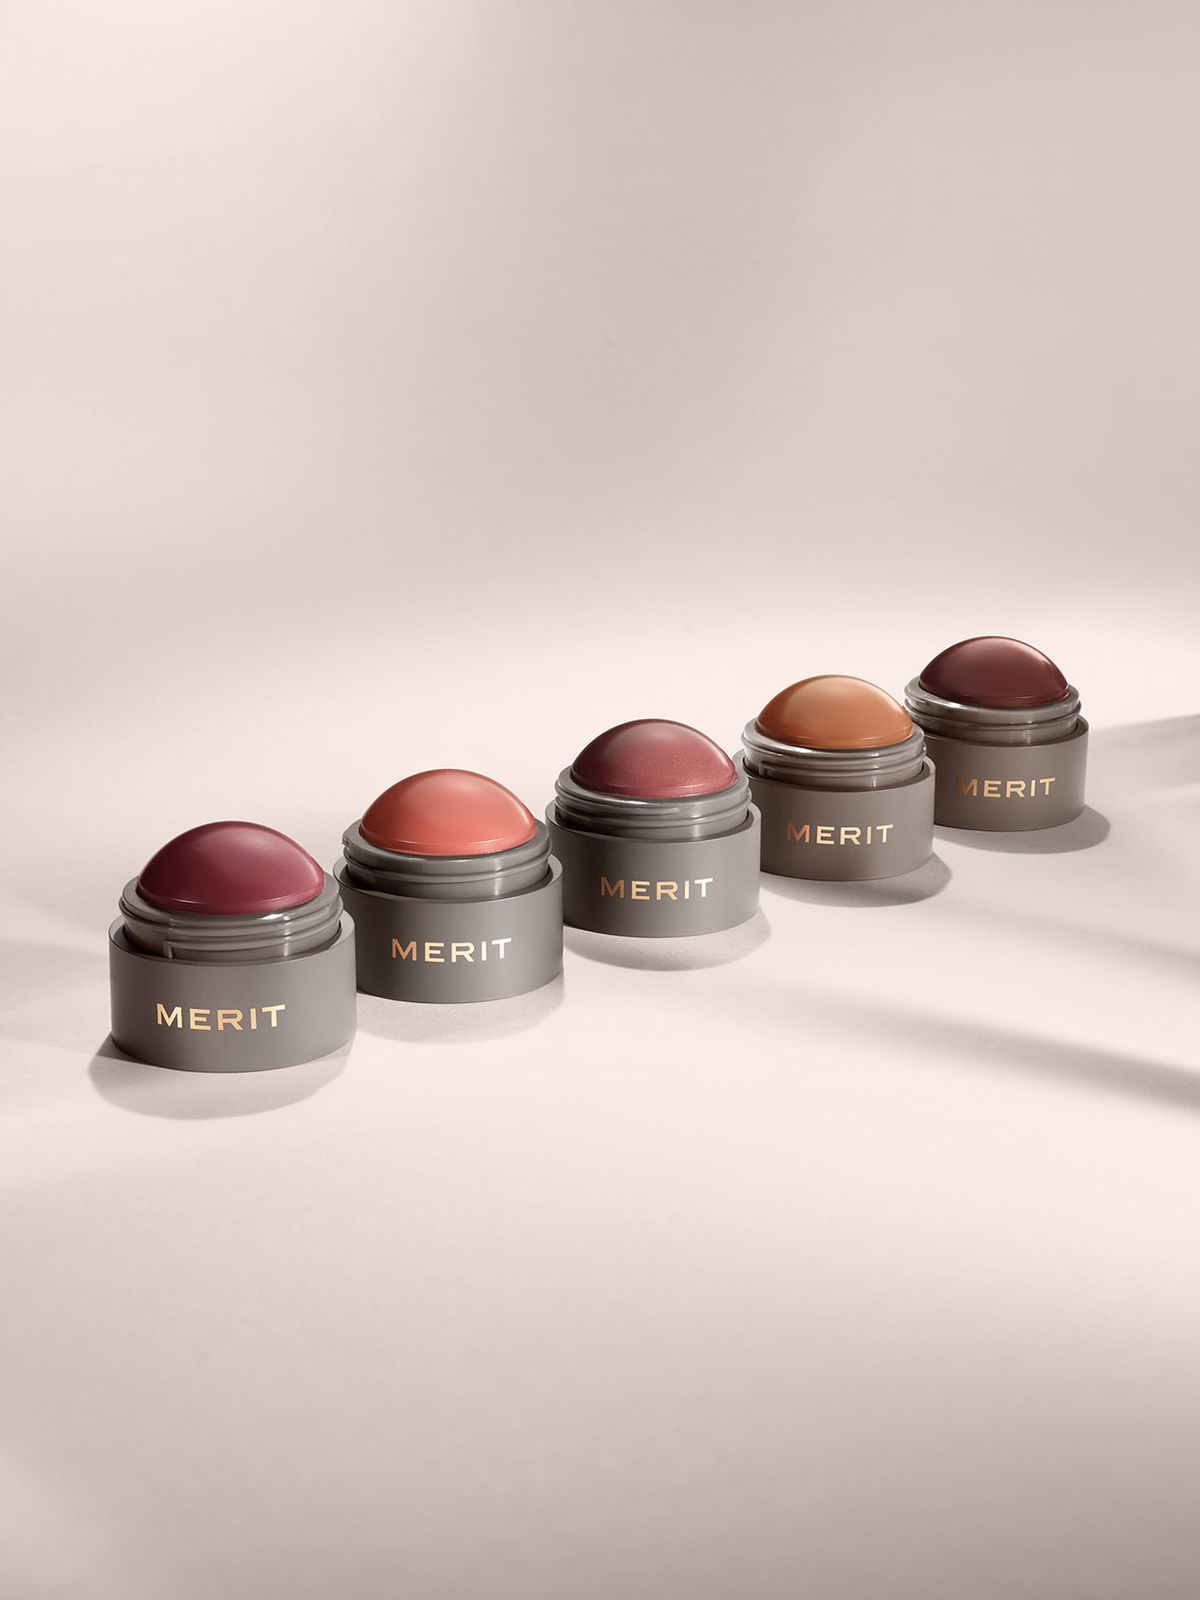 Merit Makeup Products Review